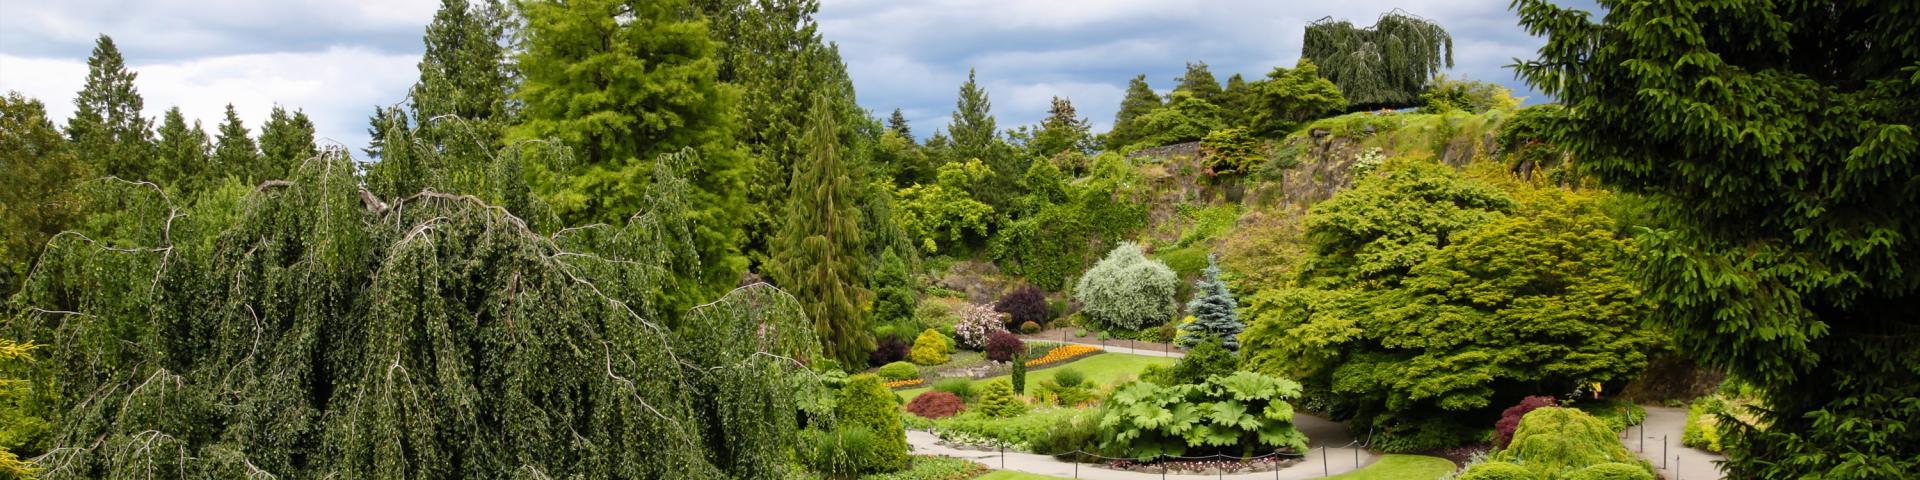 7 Beautiful Parks and Gardens in Vancouver